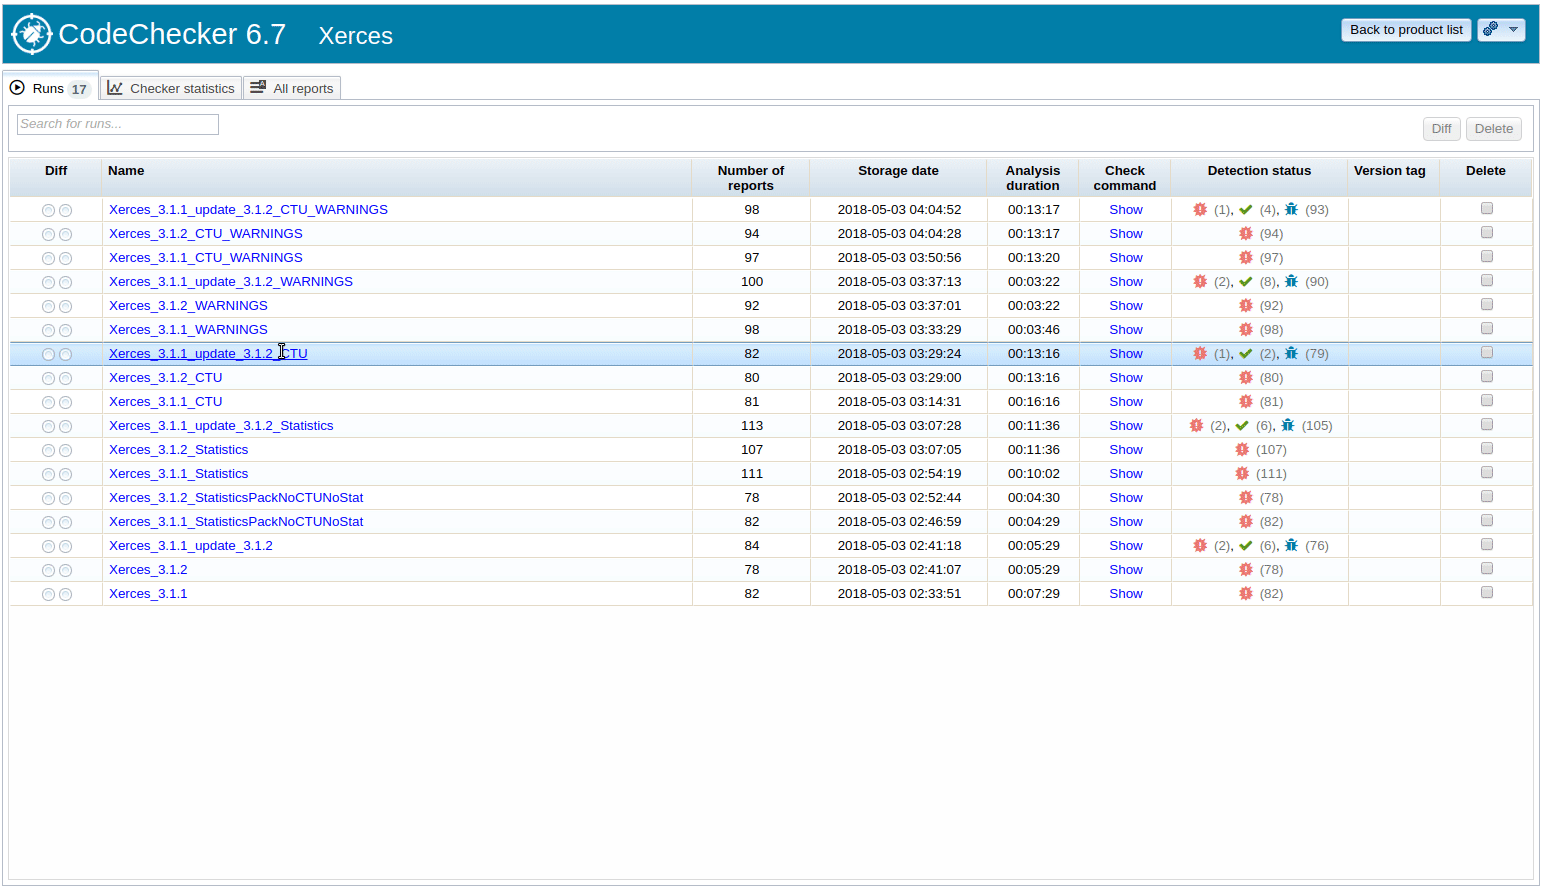 Web interface showing list of analysed projects and bugs